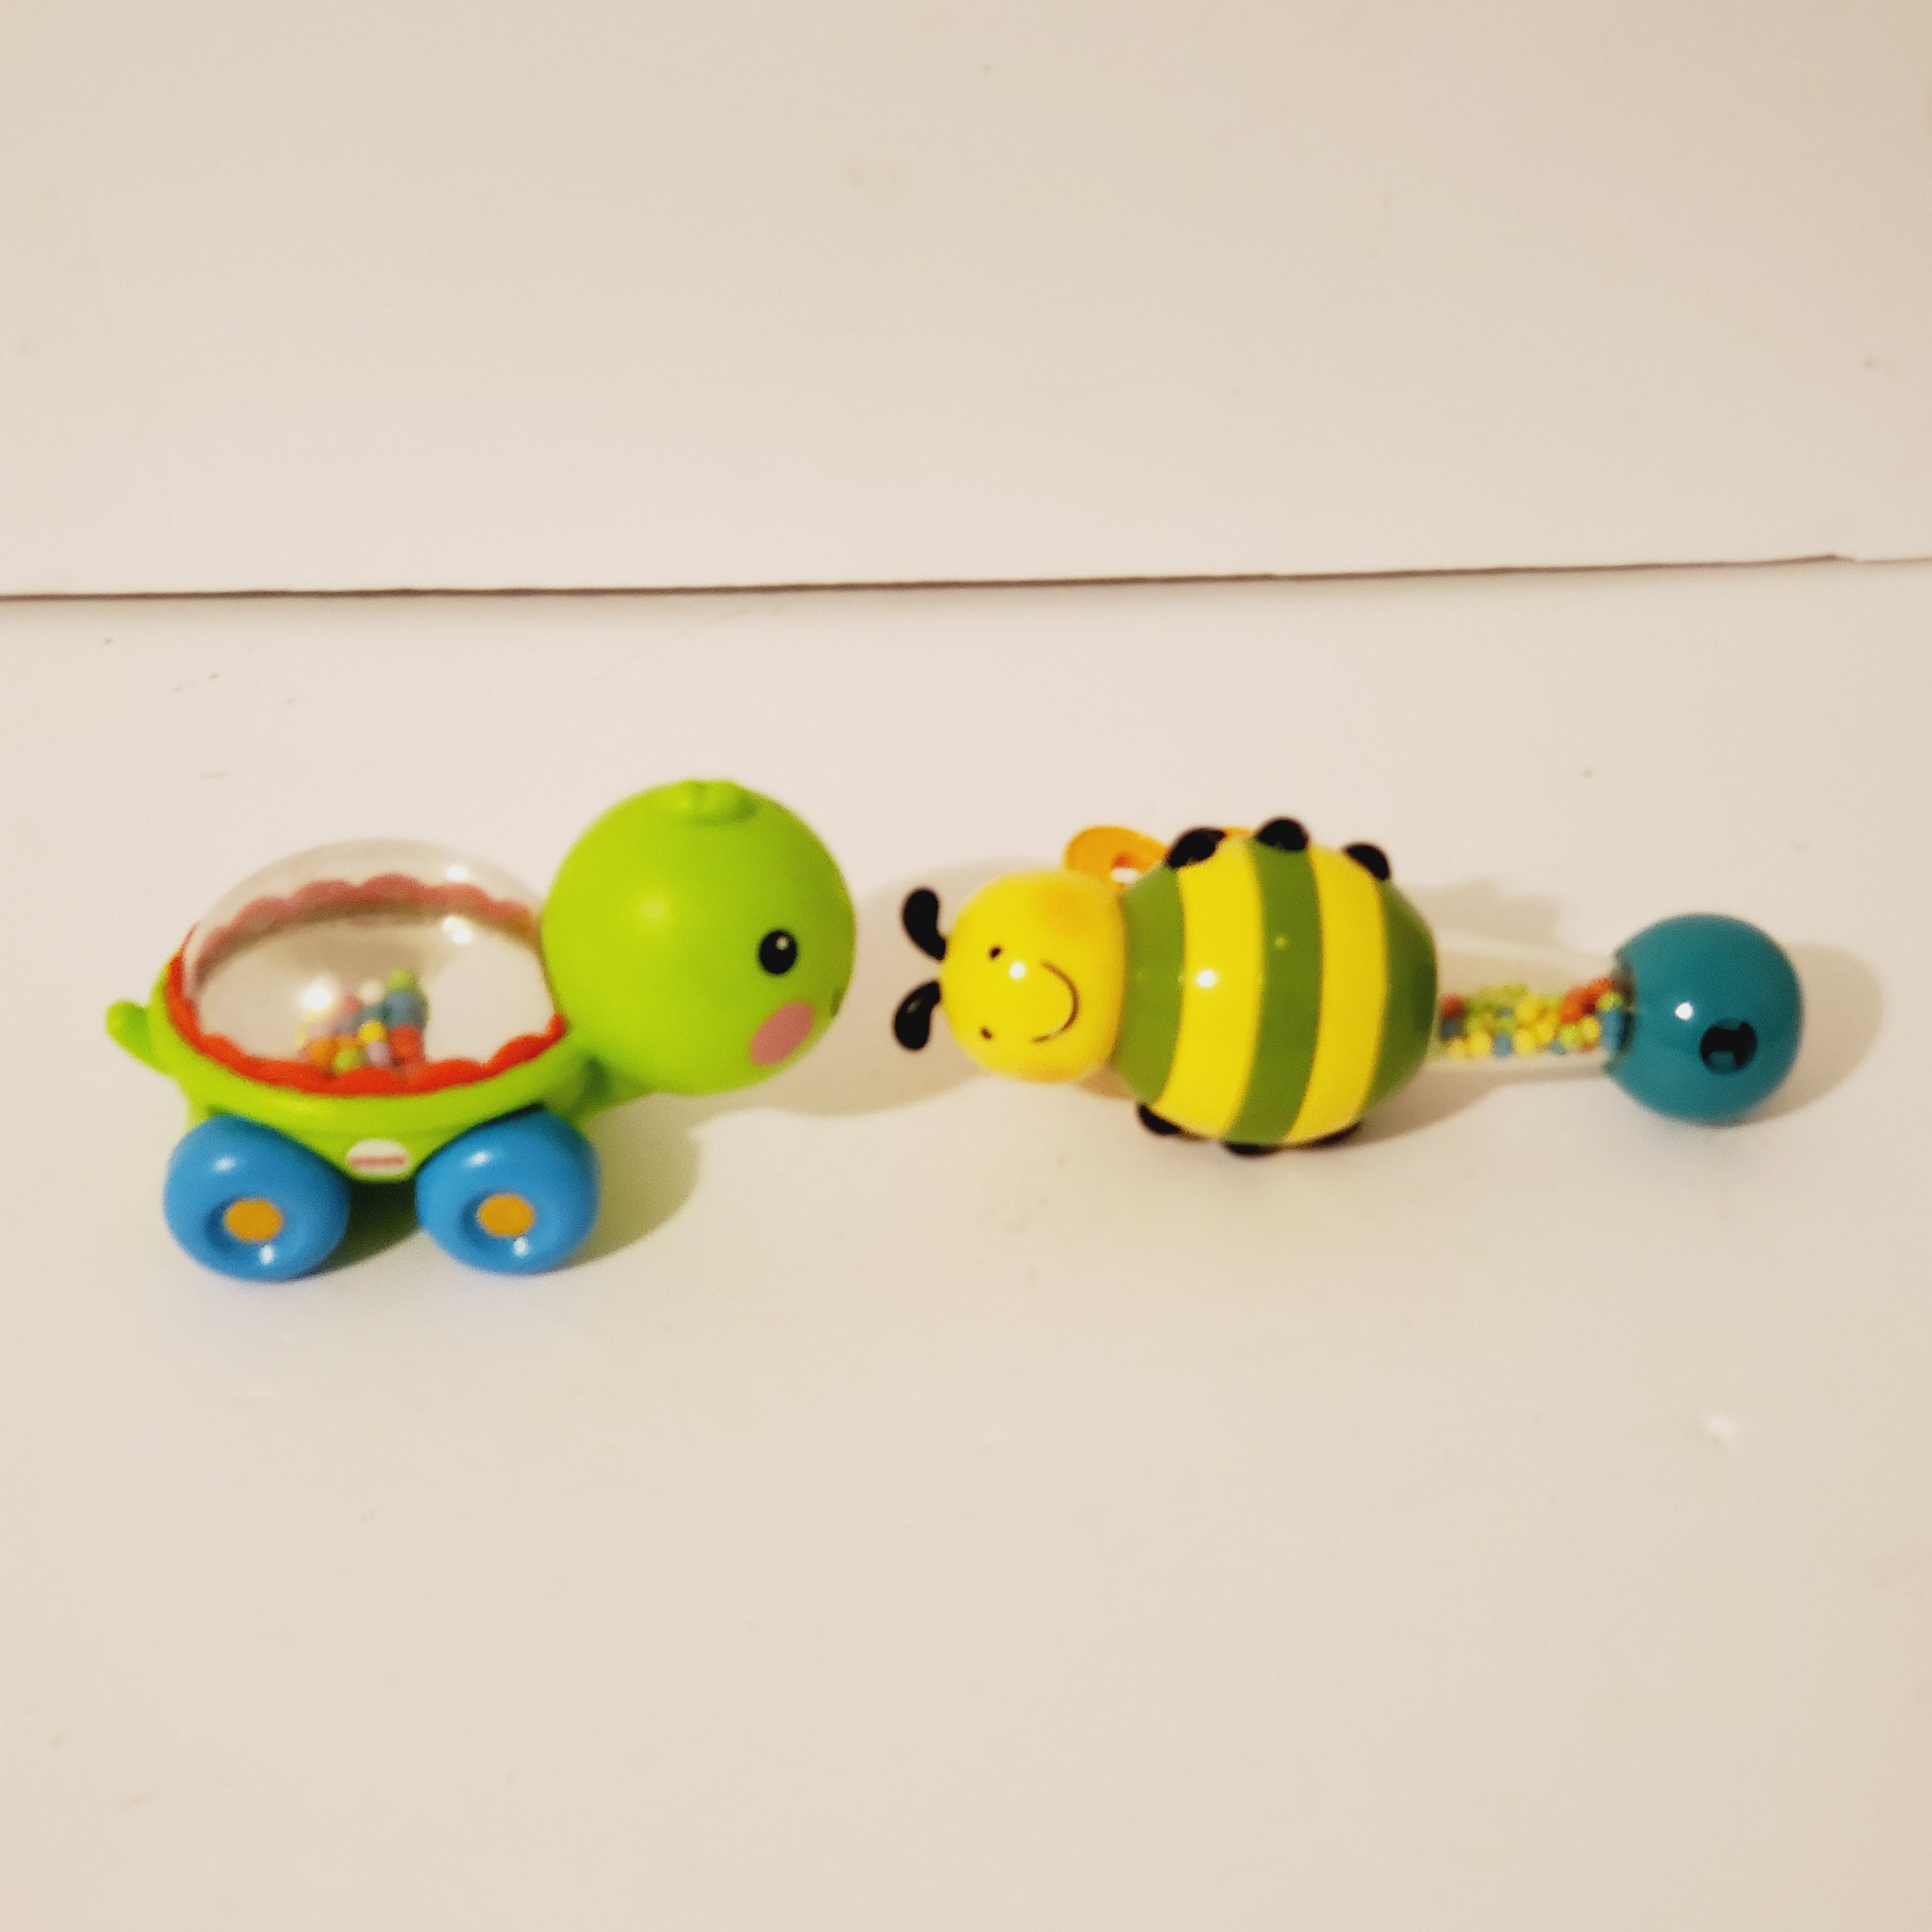 Fisher Price Toy Keychains: Miniature Chatter Phone, Corn Popper